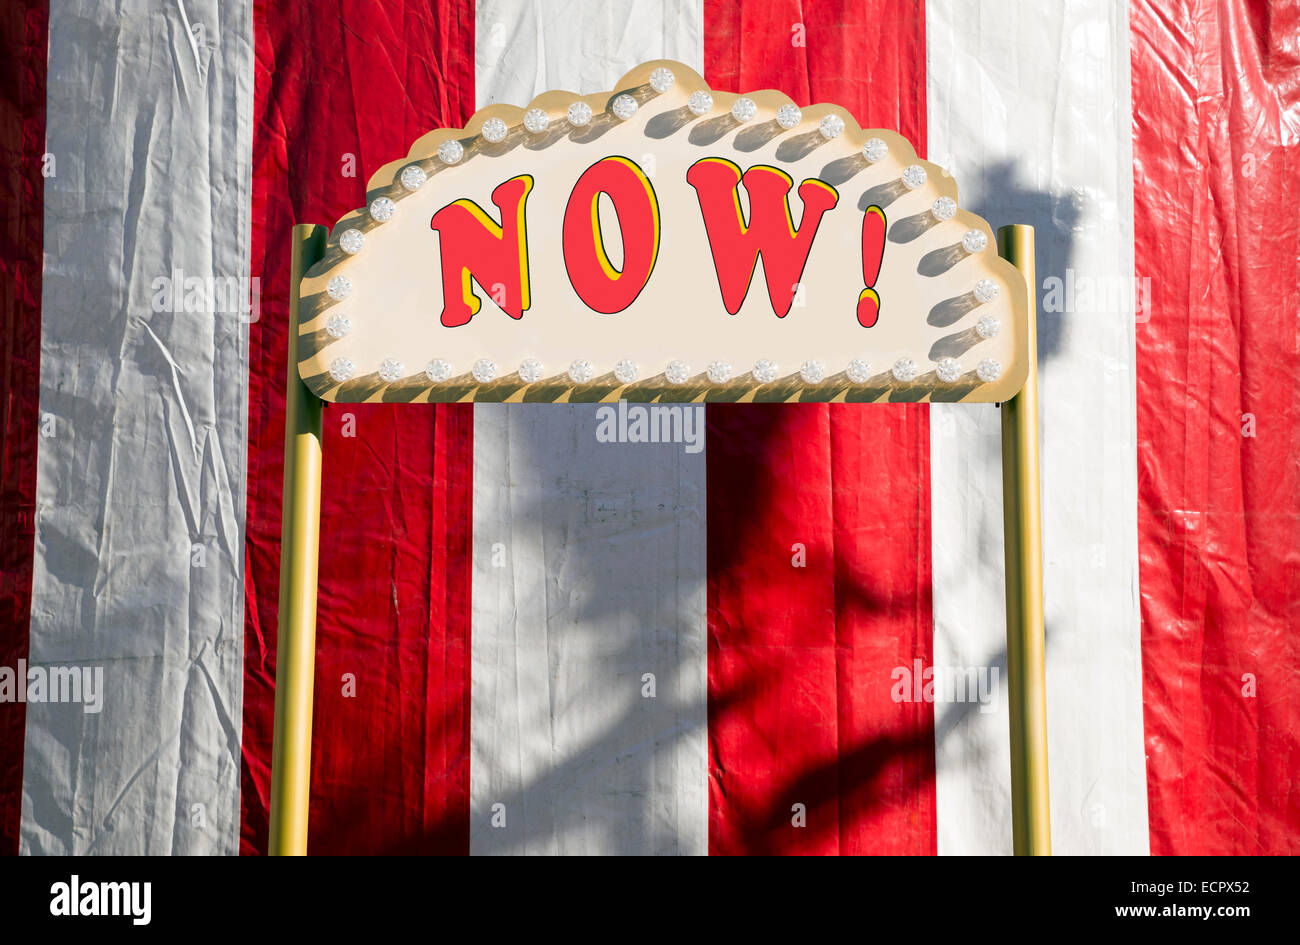 Now sign against red and white circus tent Stock Photo